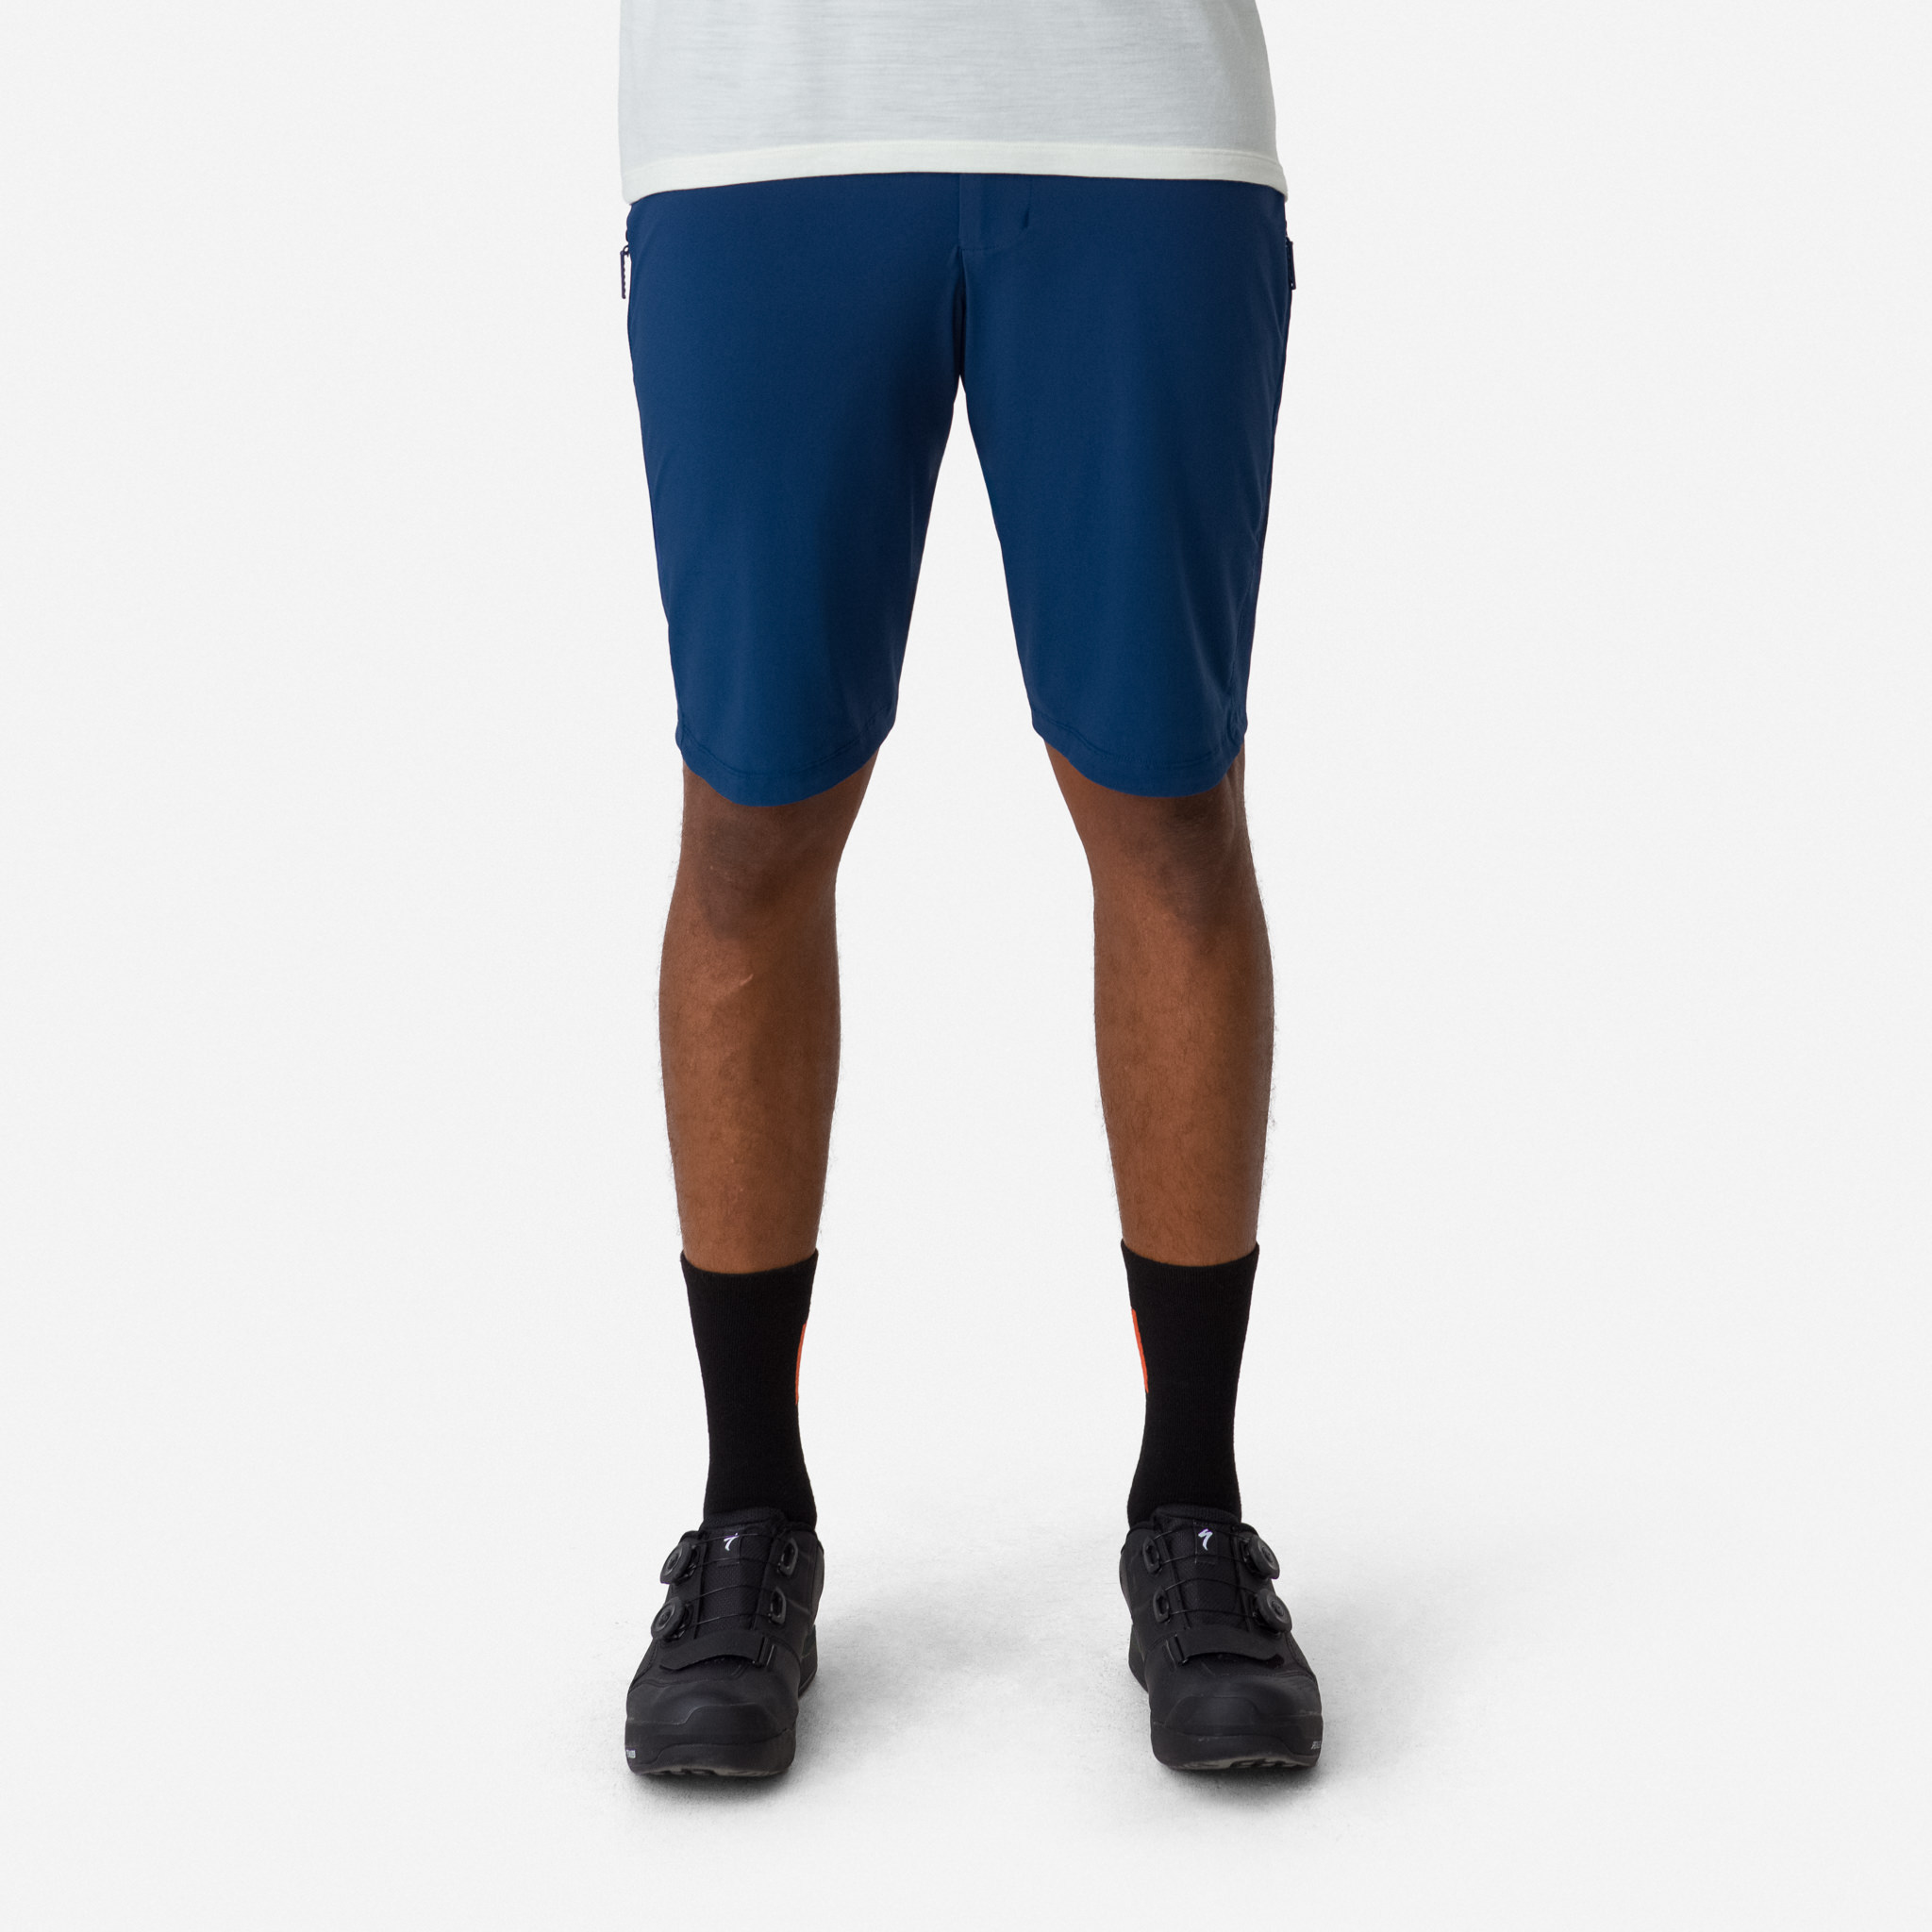 Rapha Trail Fast & Light Shorts Review